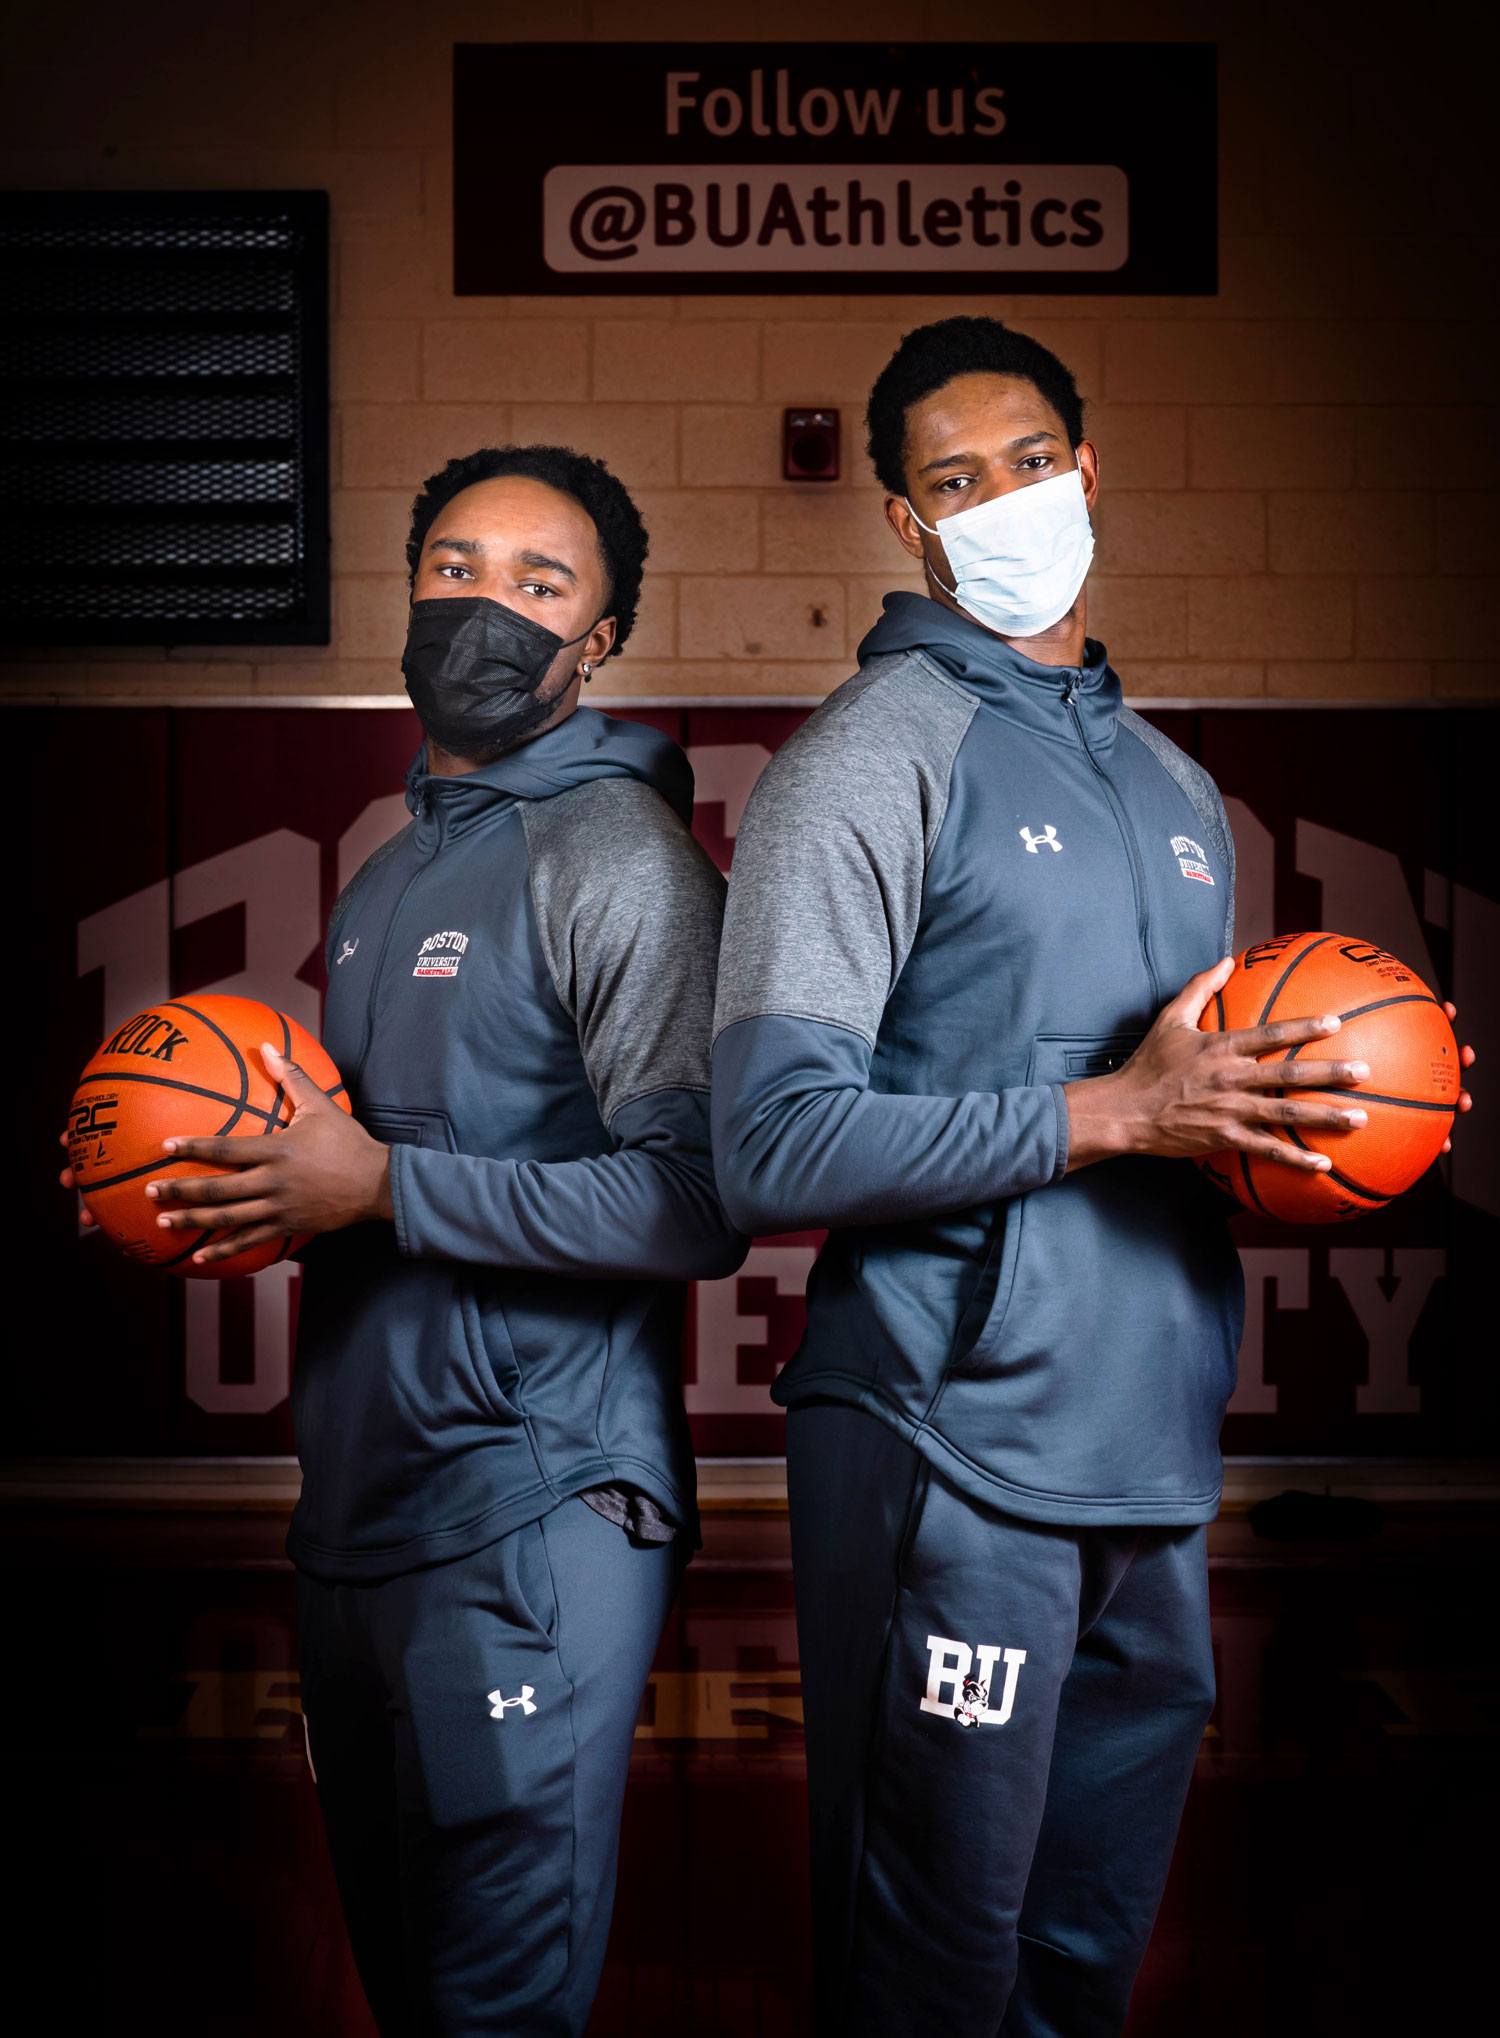 A photo of Walter Whyte and Jonas Harper standing next to one another, wearing masks, and each holding a basketball